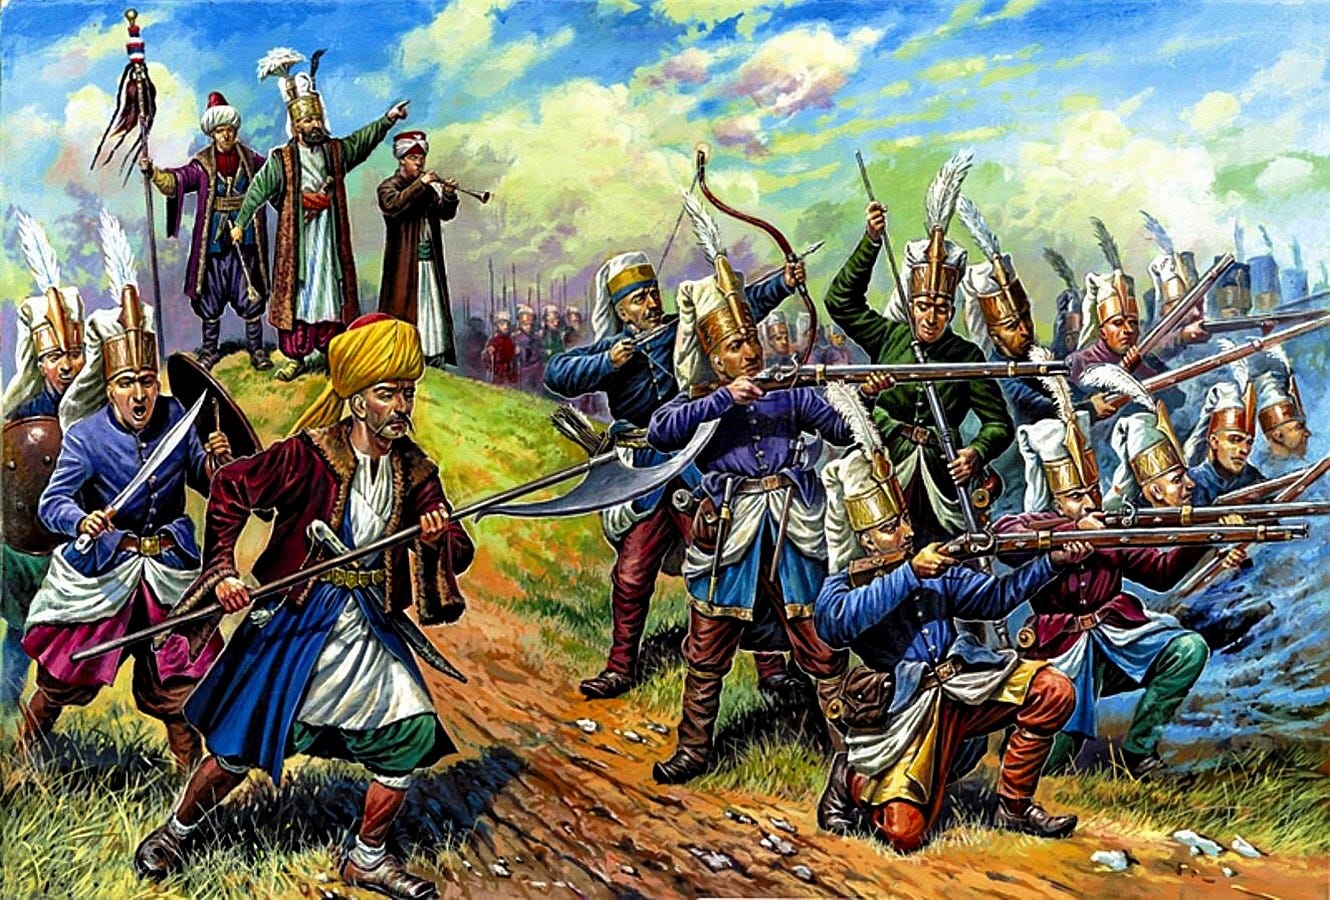 The Janissaries - The Elite Soldiers of the Turkish Empire | by Peter  Preskar | History of Yesterday